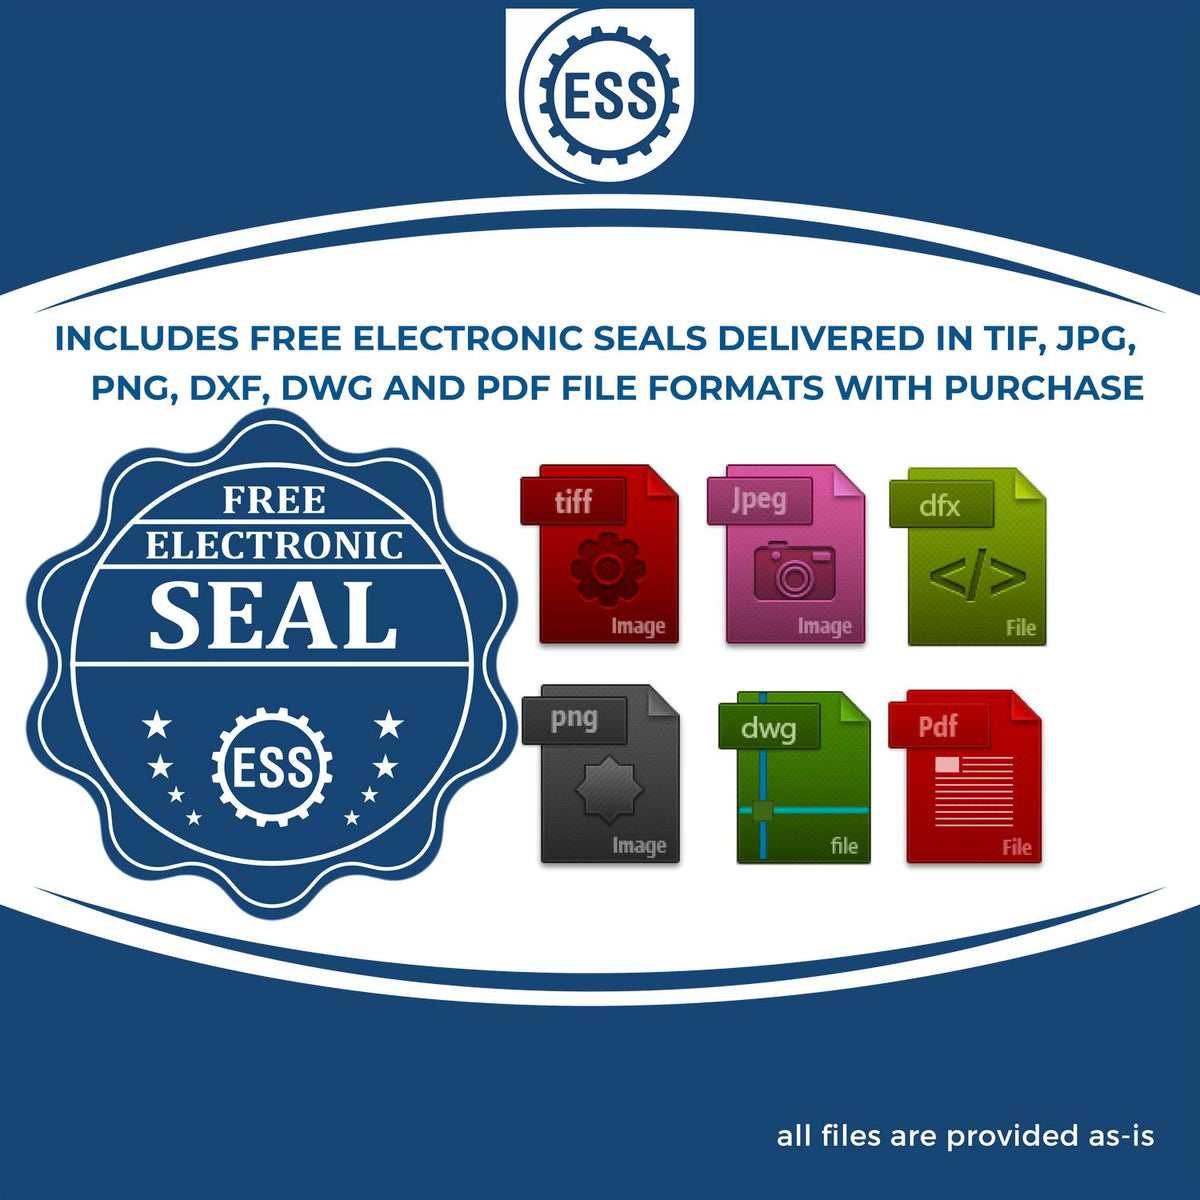 An infographic for the free electronic seal for the Self-Inking North Carolina Geologist Stamp illustrating the different file type icons such as DXF, DWG, TIF, JPG and PNG.